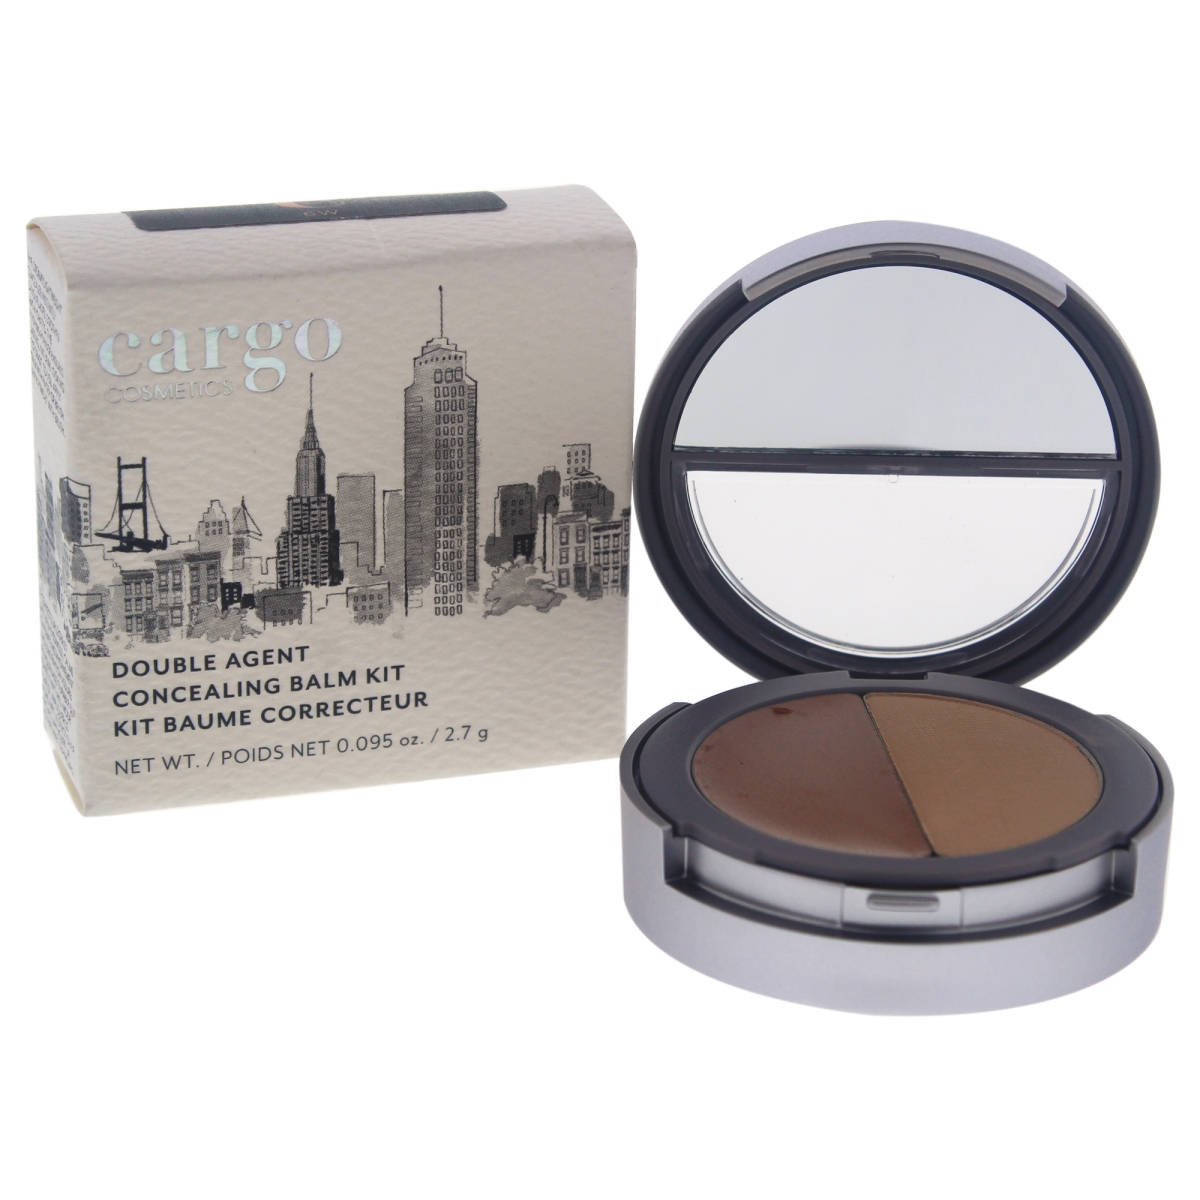 W-c-12155 Double Agent Concealing Balm Kit At 6w Deep For Women - 0.095 Oz